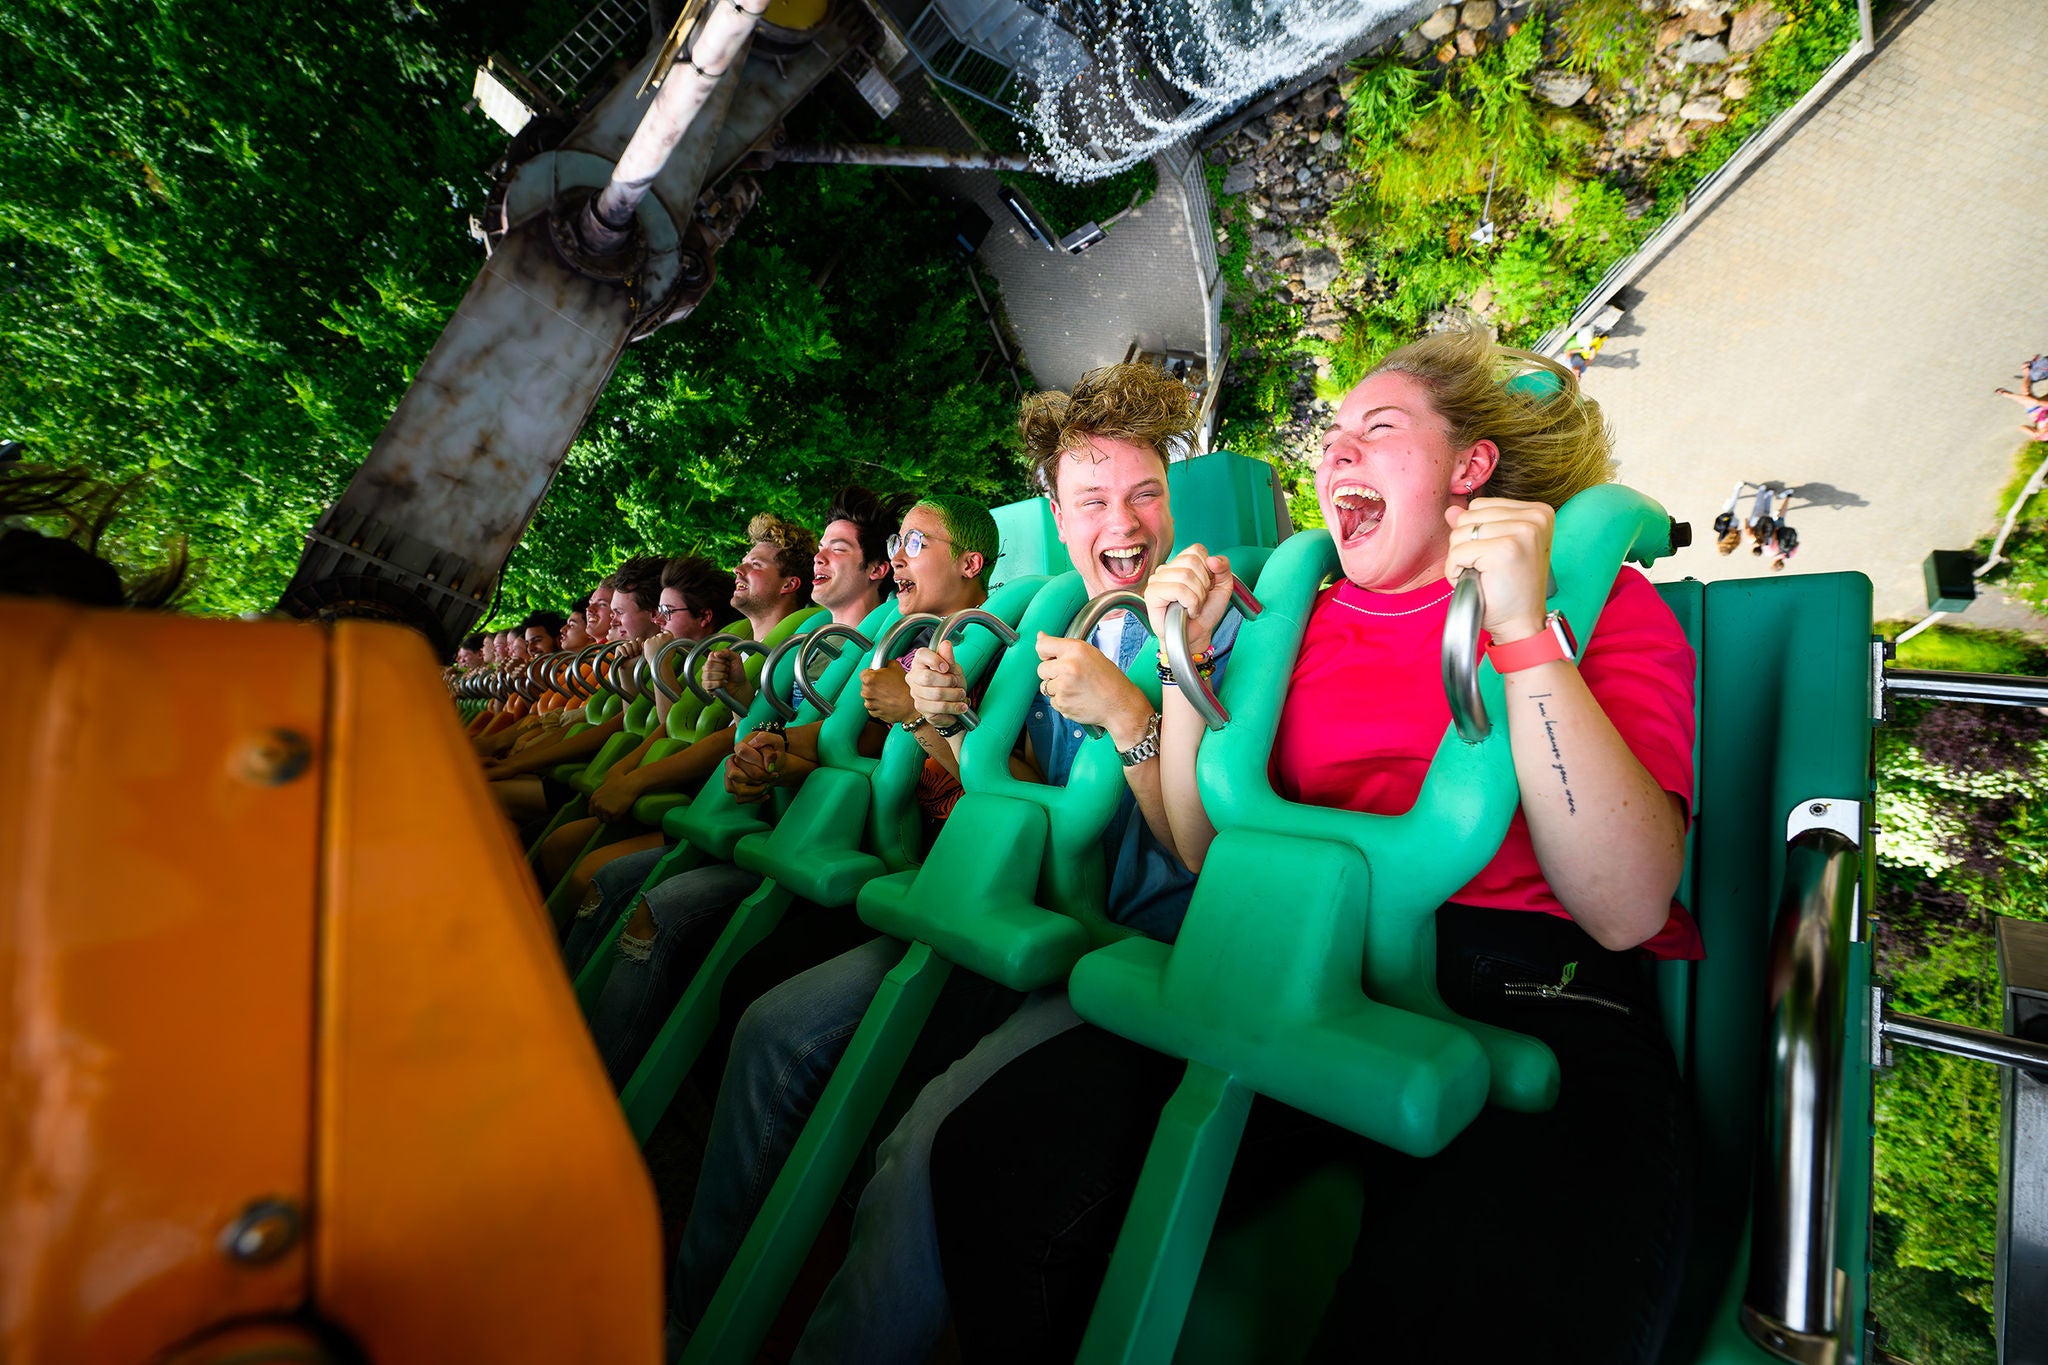 Buy a Walibi season ticket together with your friends for unlimited days of HARDGAAN.